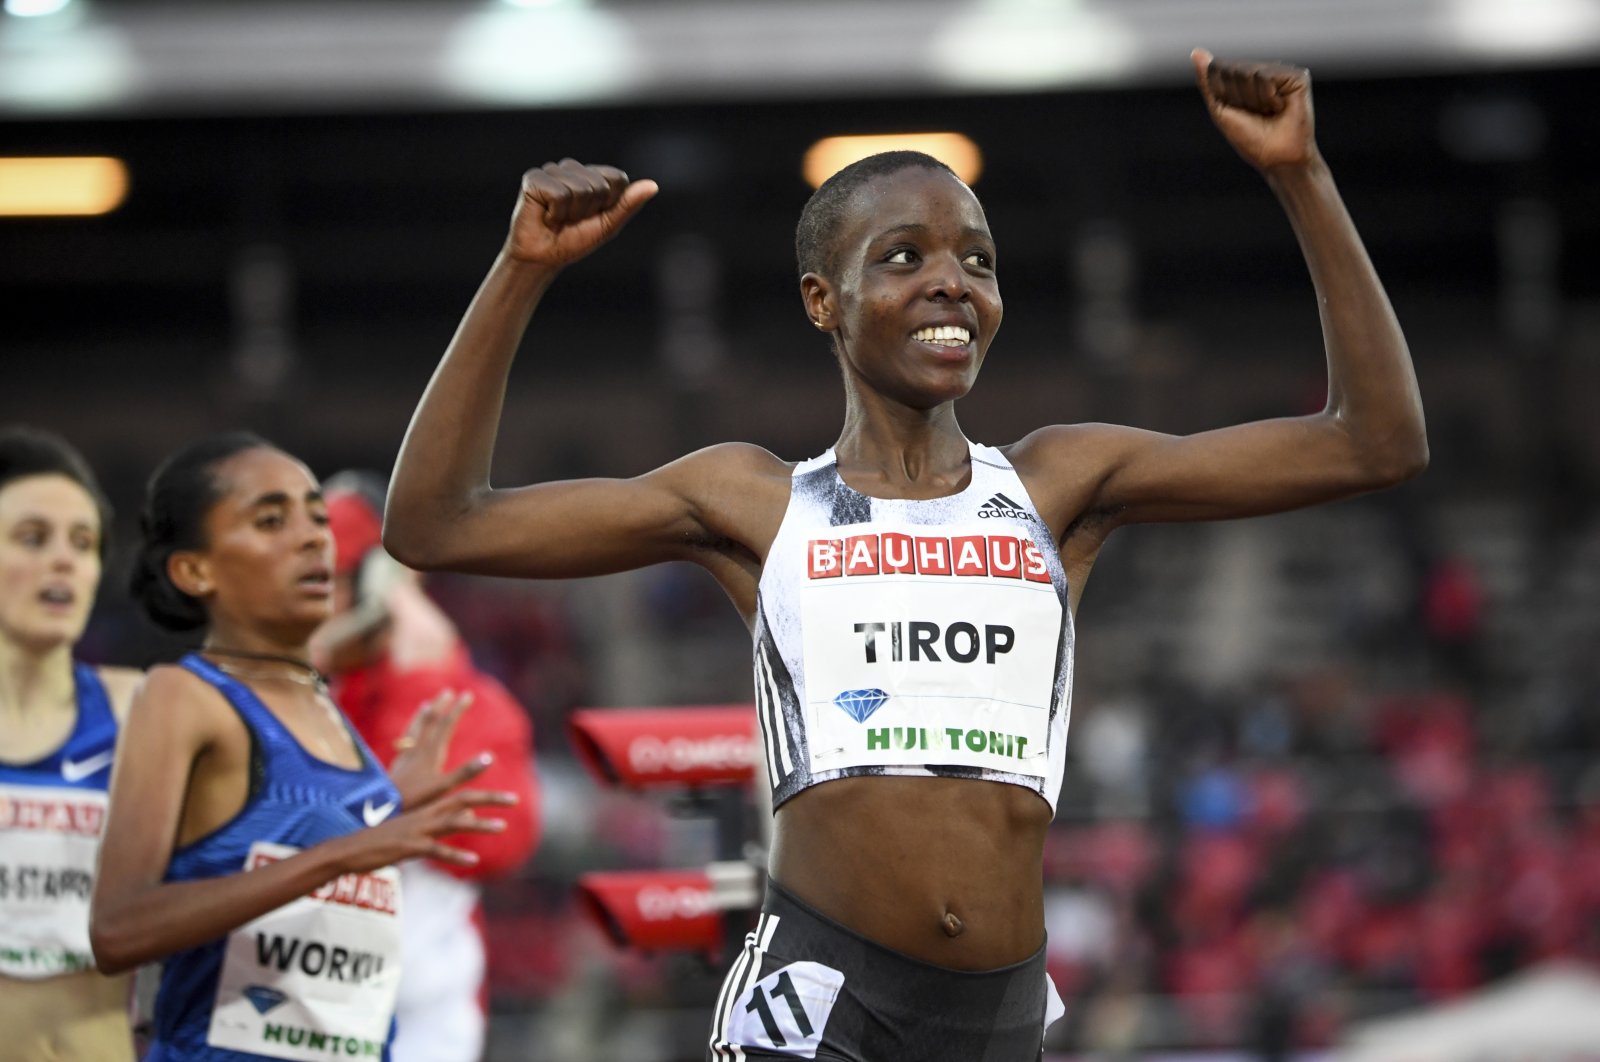 Kenya's Agnes Tirop smiles after winning the women's 1500-meter race at the IAAF Diamond League meeting at Stockholm Olympic Stadium in Stockholm, Sweden, May 30, 2019. (AP Photo)